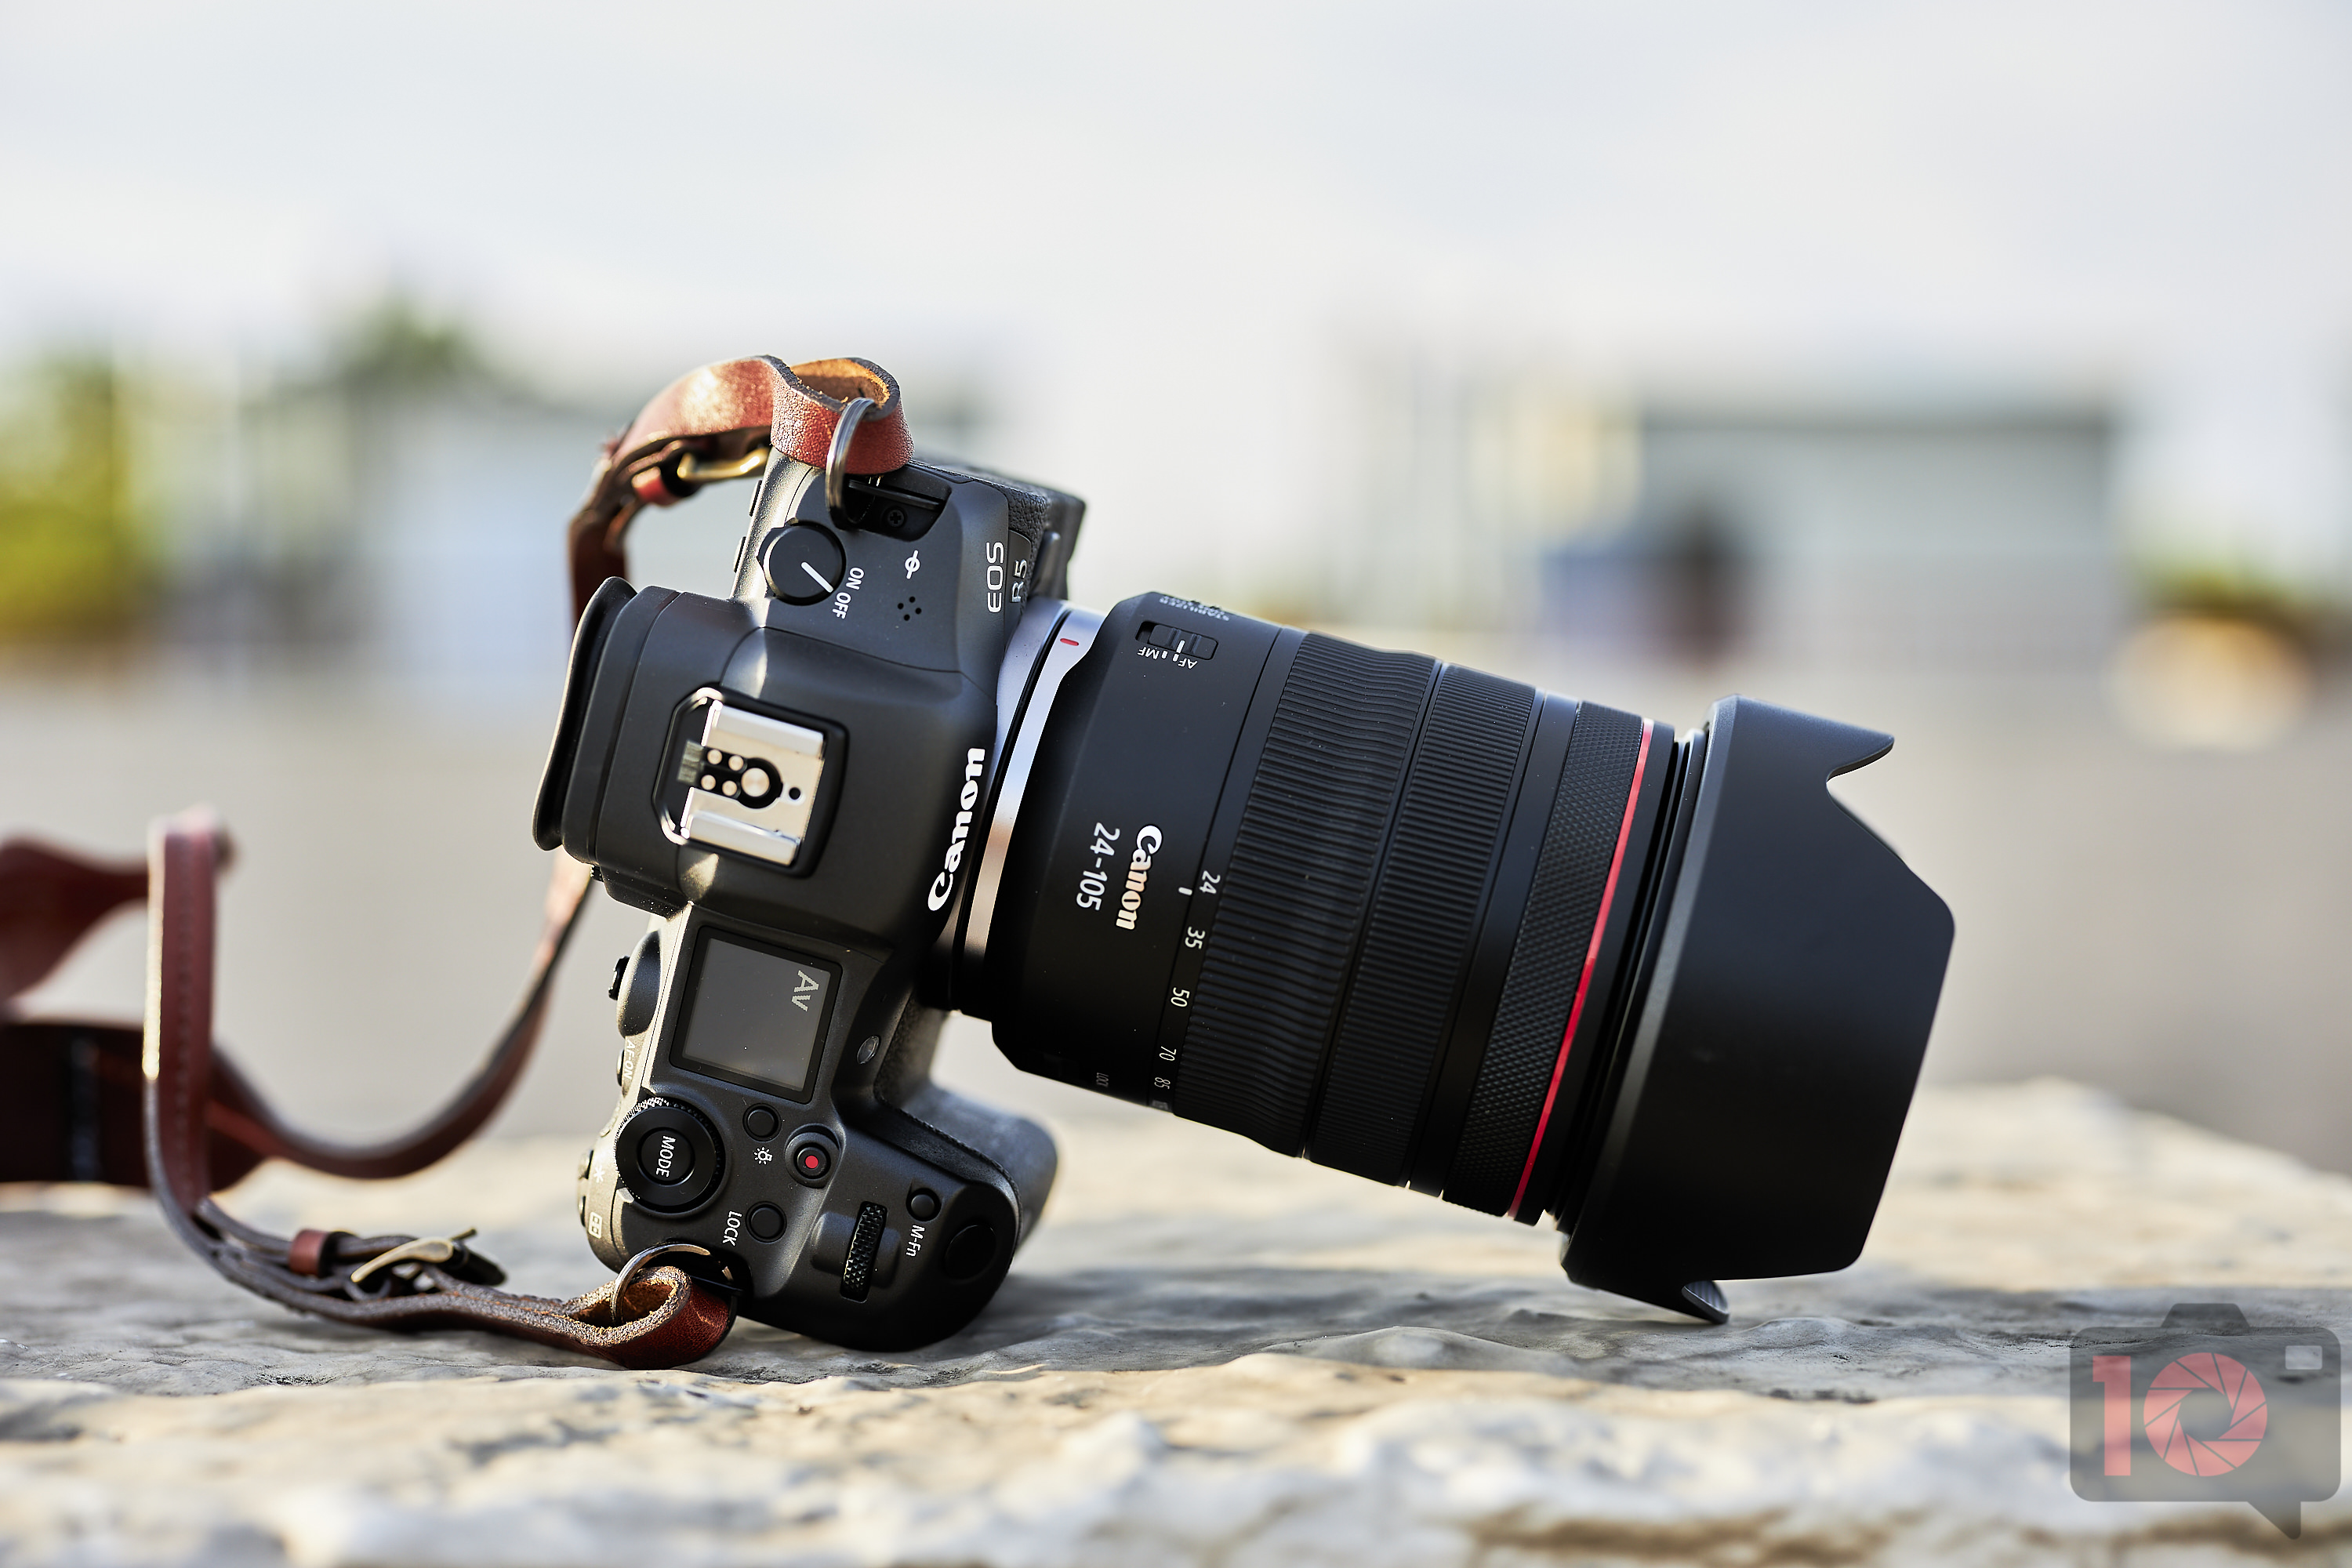 We Handheld the Canon EOS R5 at 105mm for Over a Second